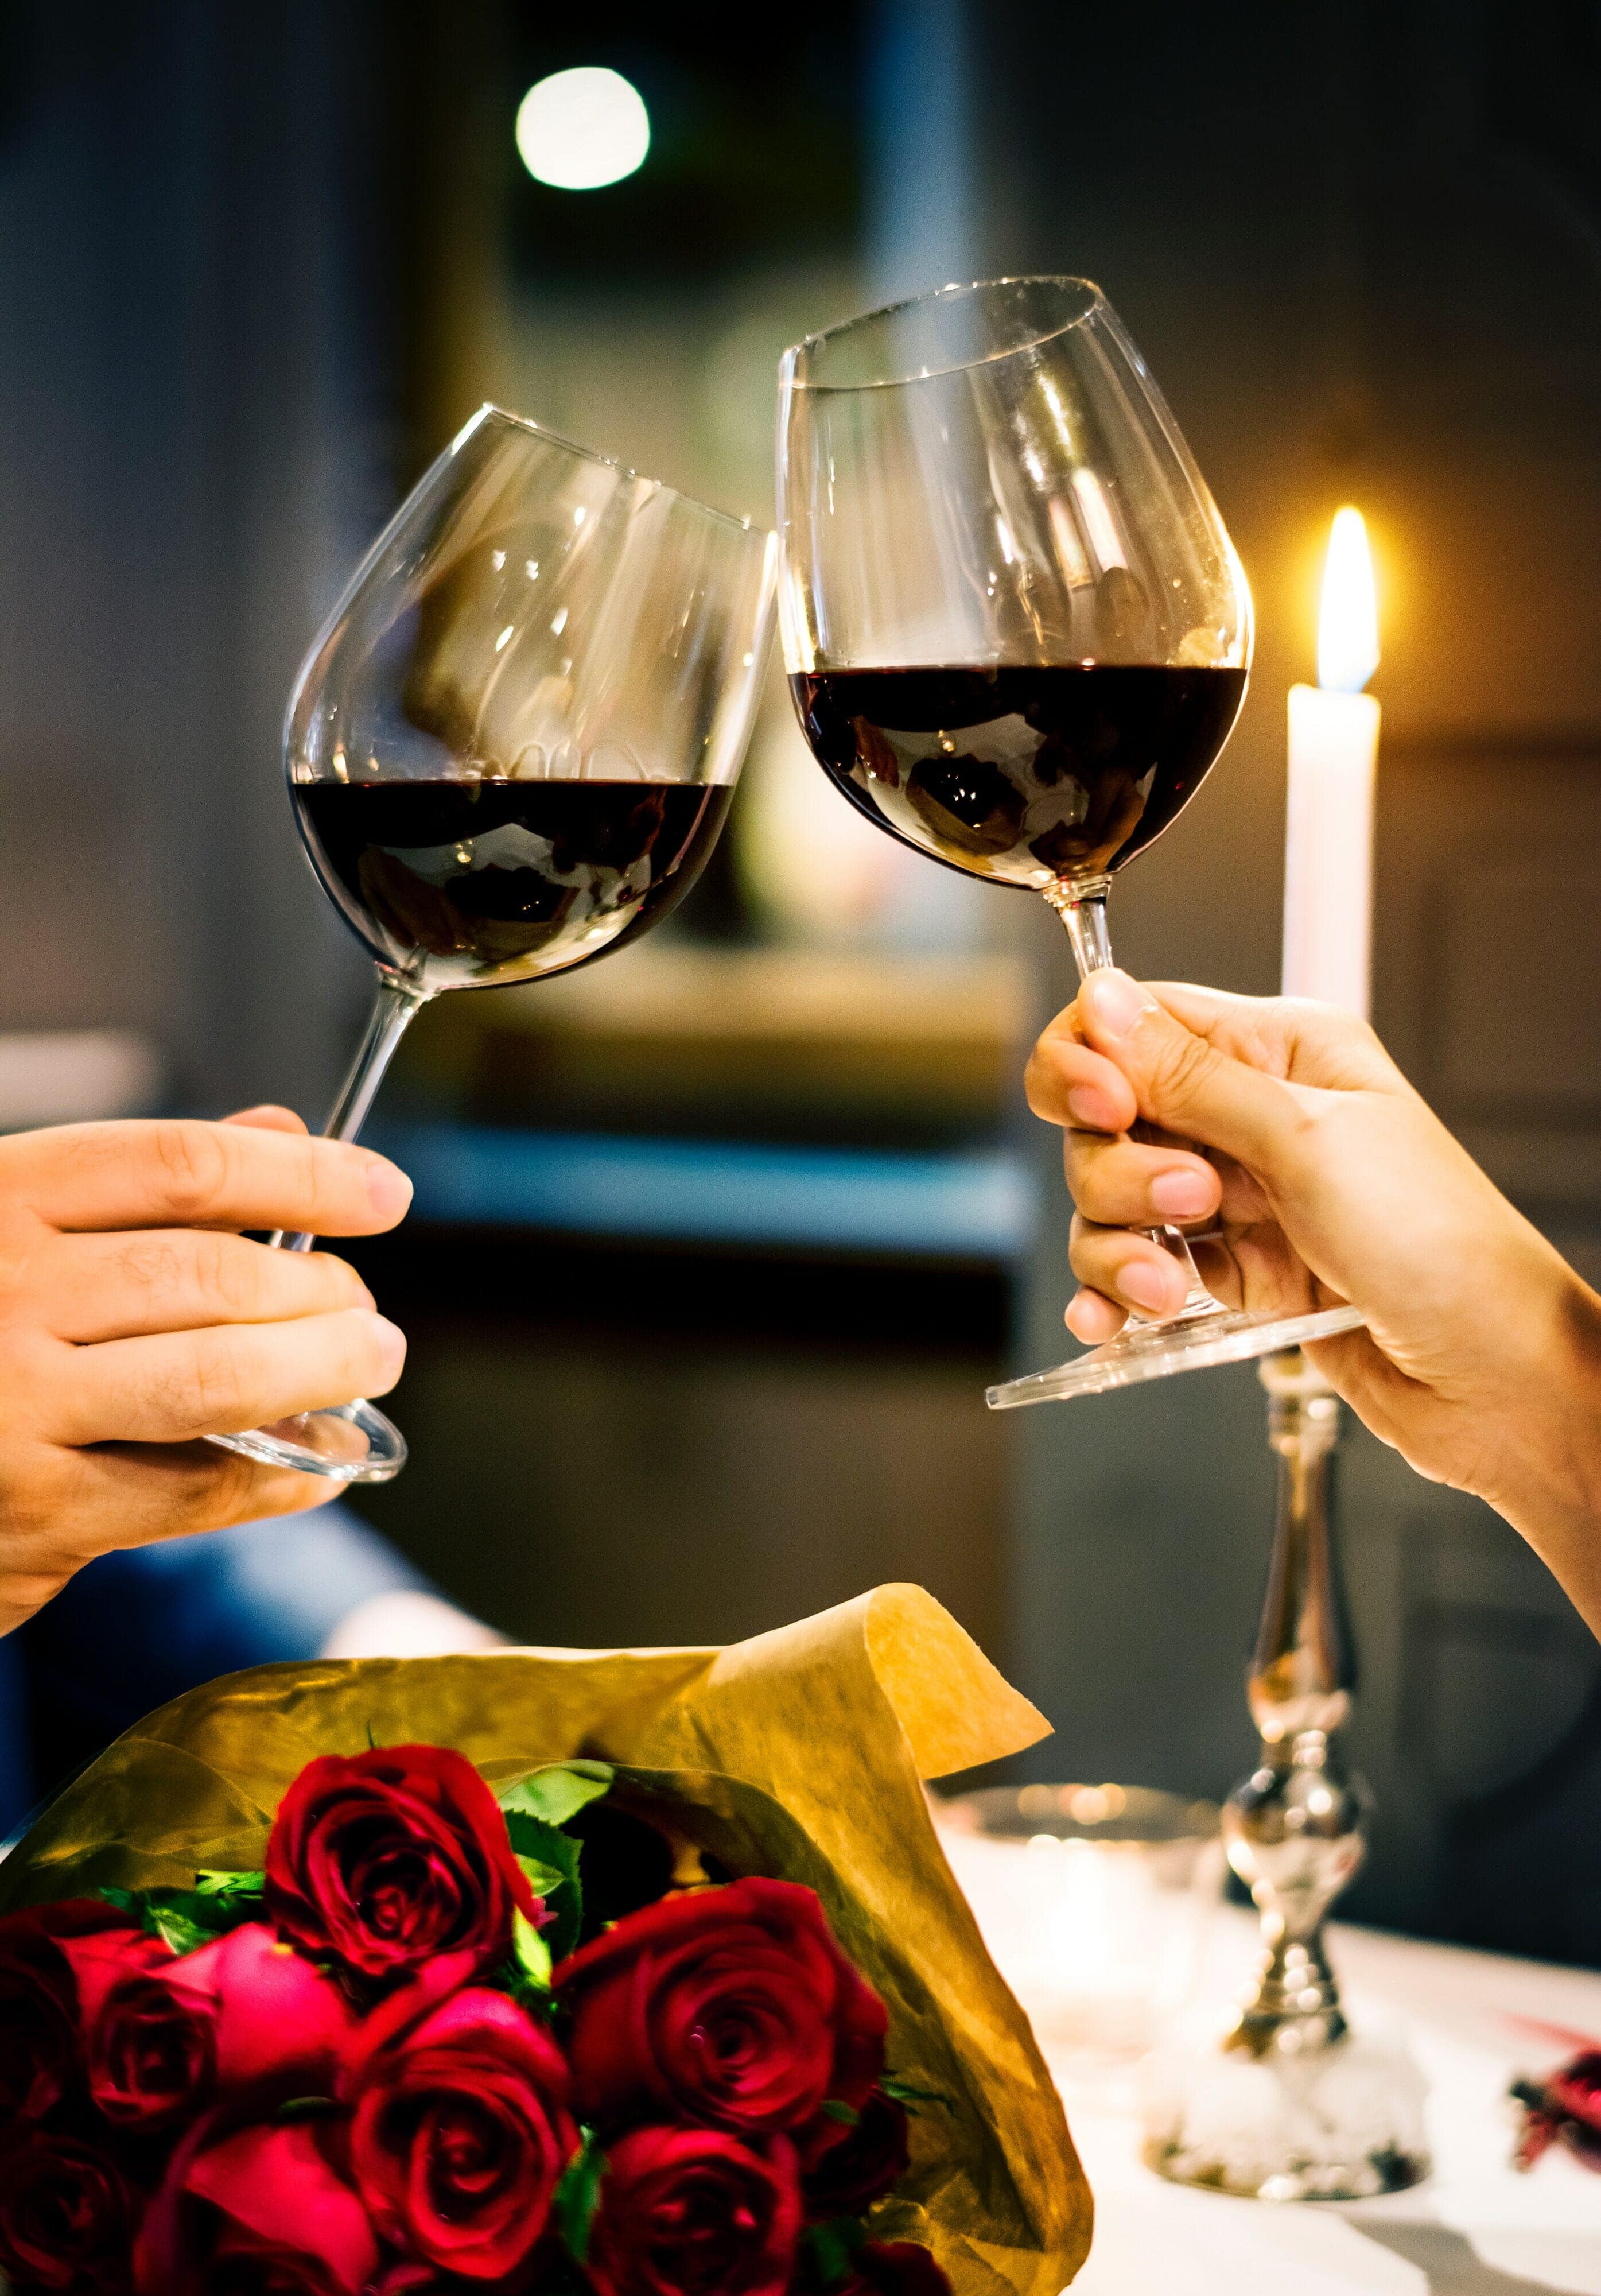 Looking to spice up date night? Here are the best romantic restaurants in Norman OK!